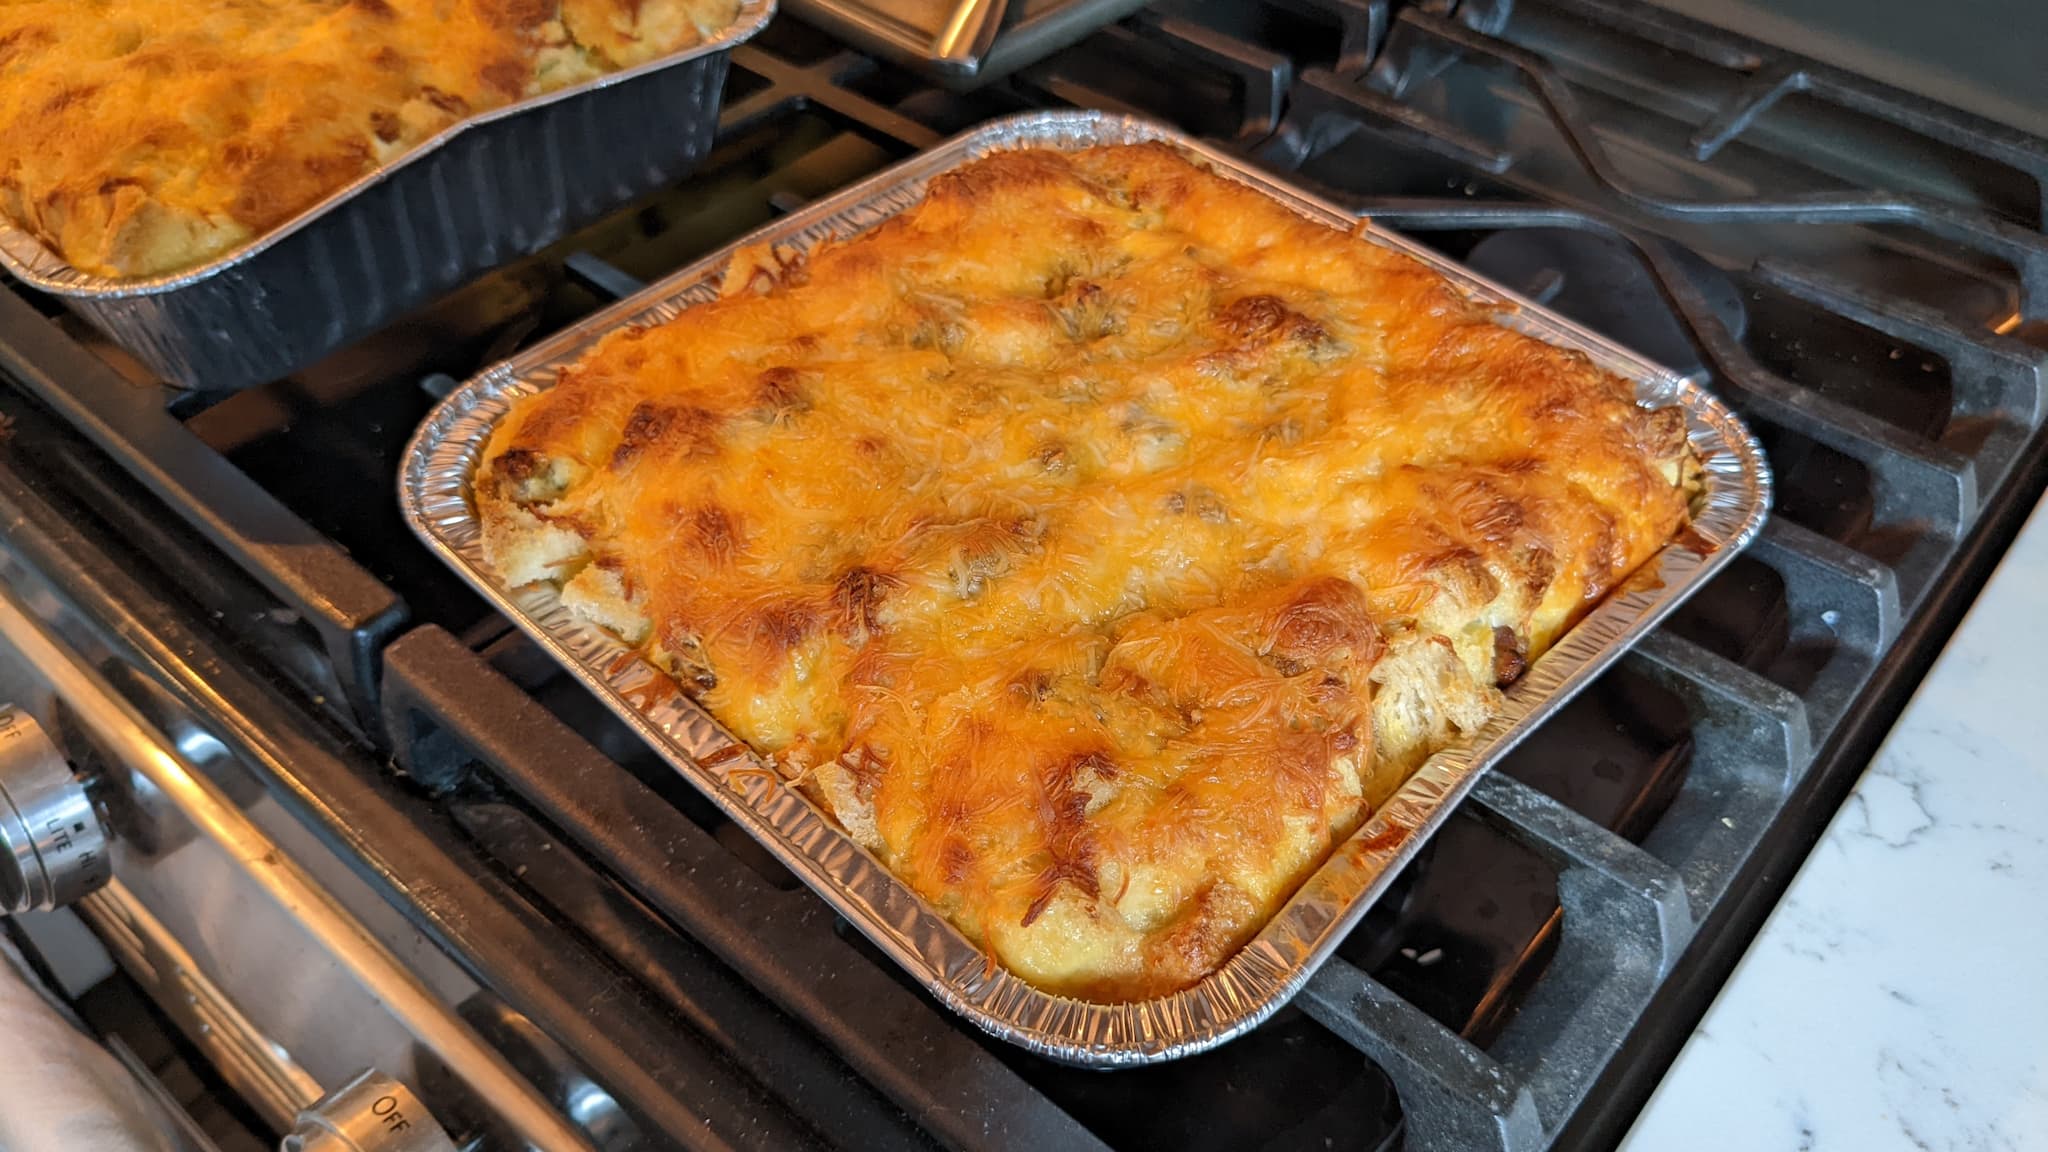 aluminum pan with cheese baked on top of a yellow mixture.